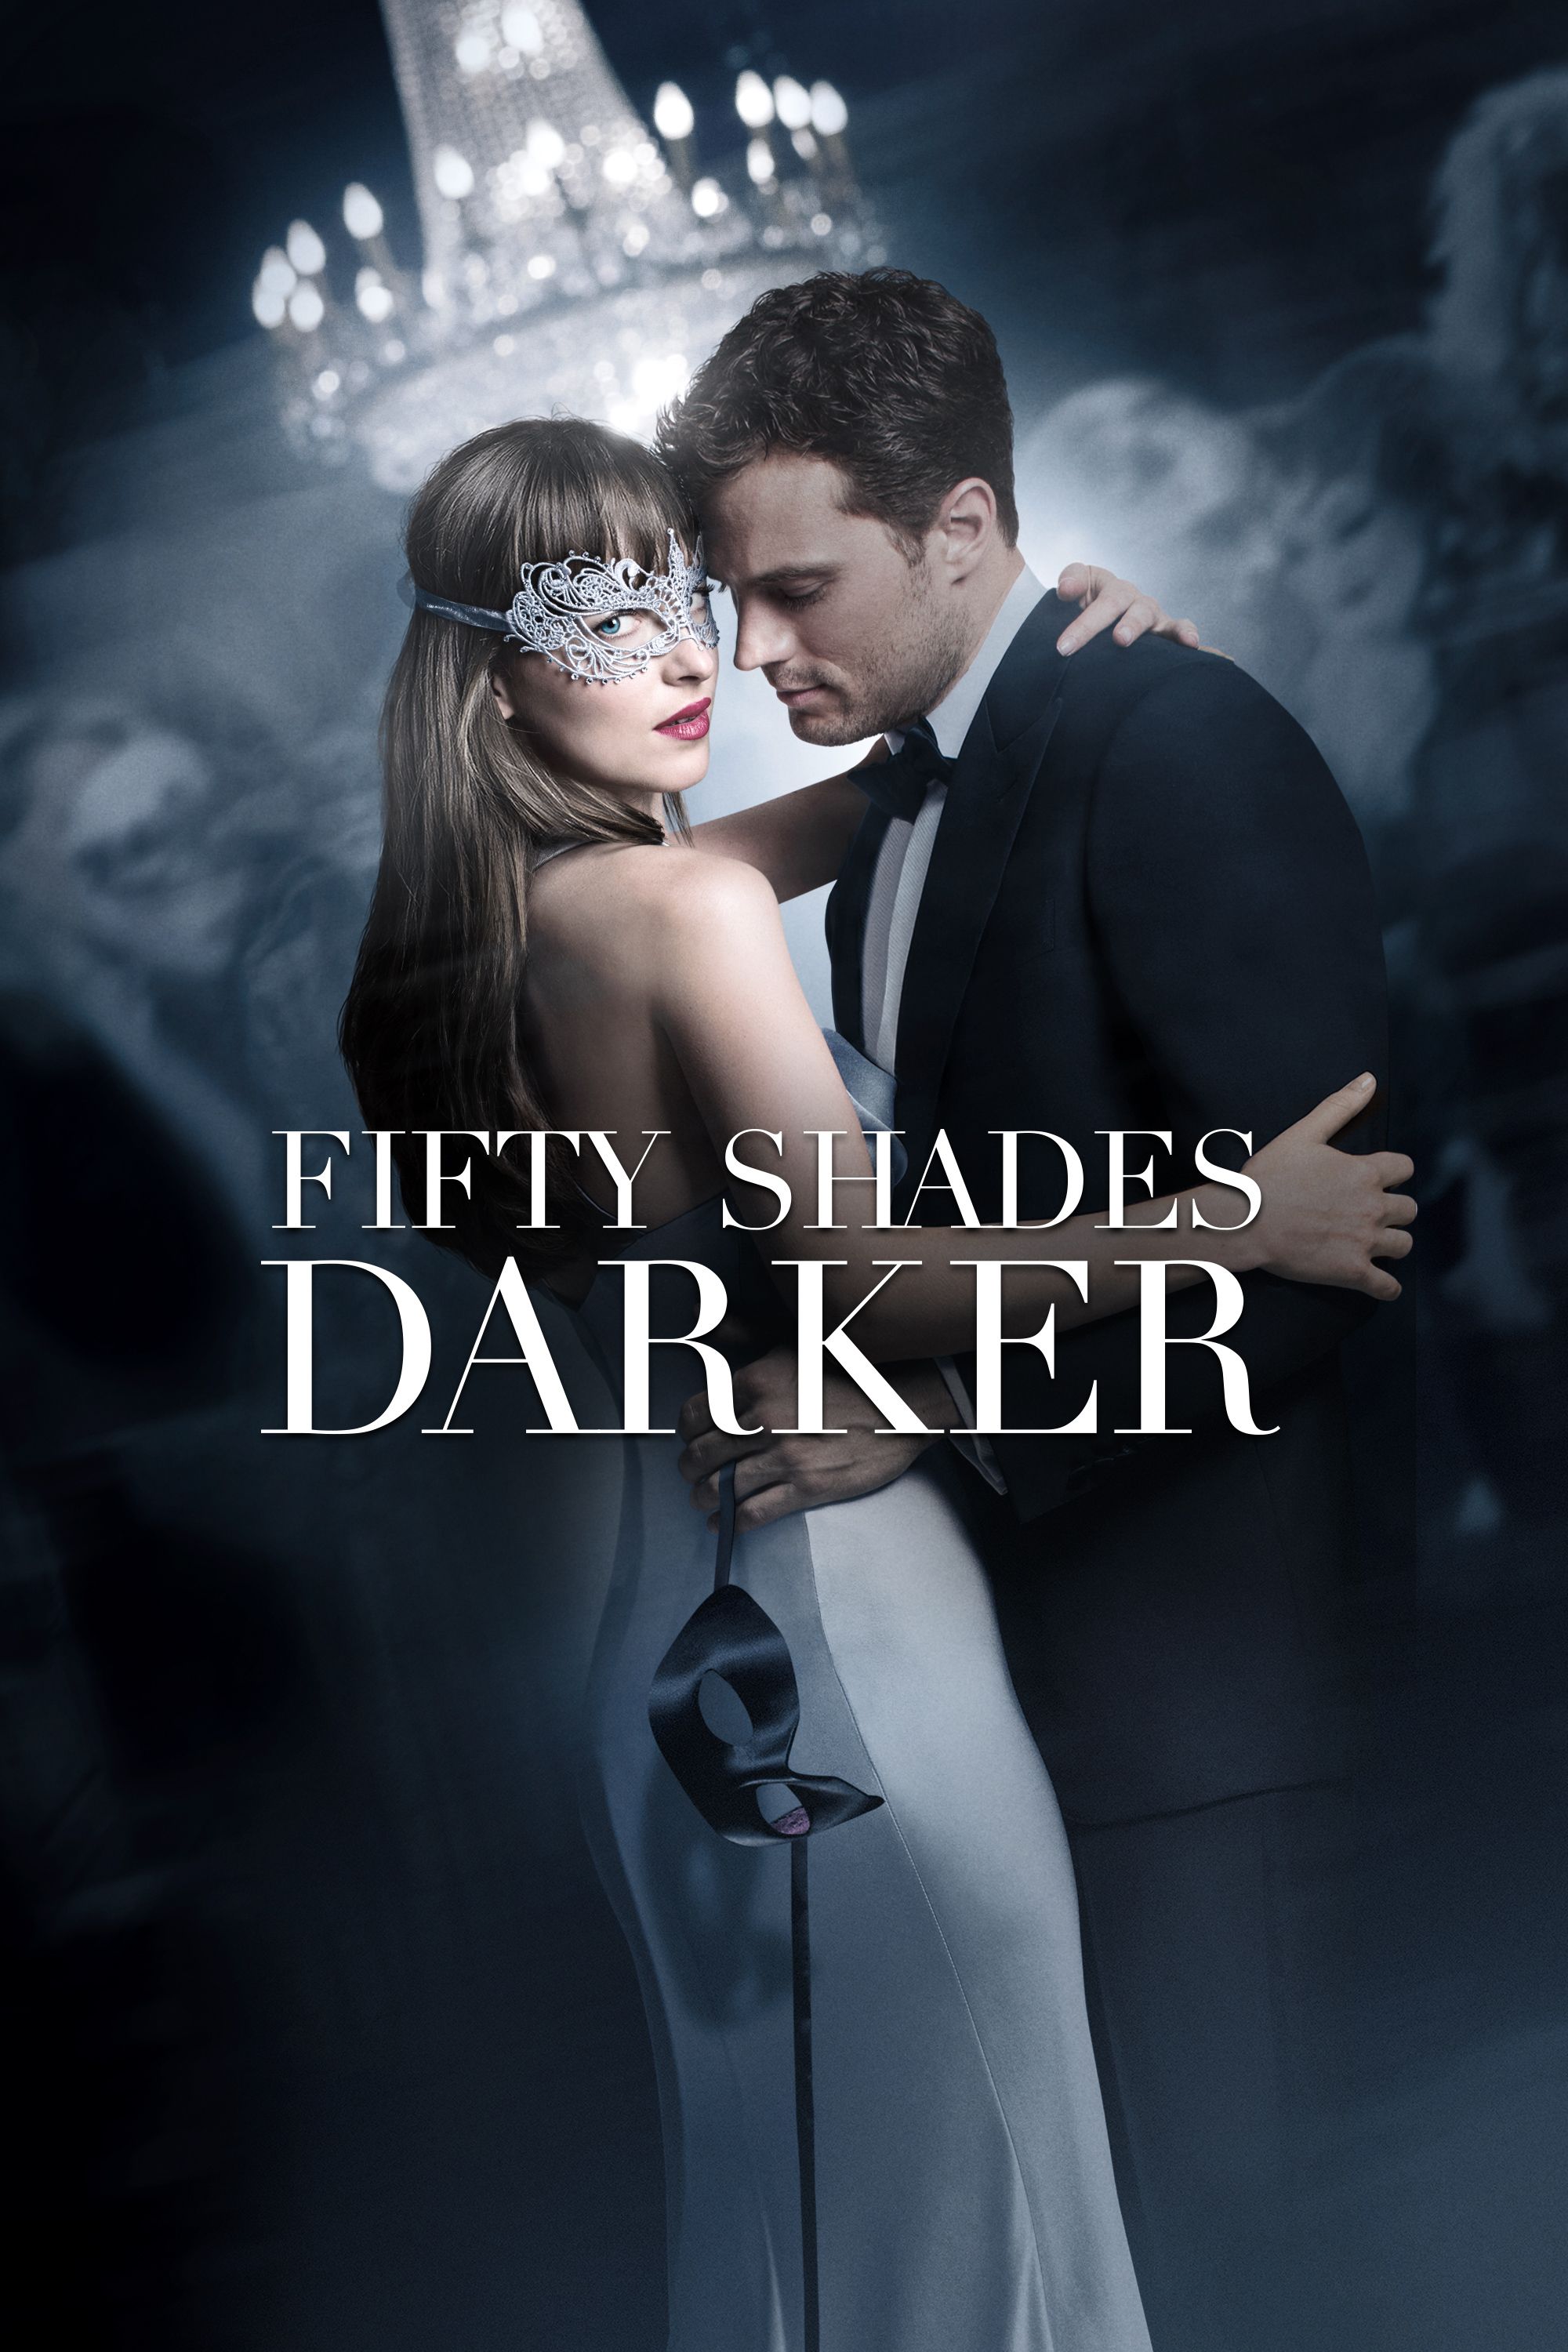 Fifty shades darker full movie download in hindi